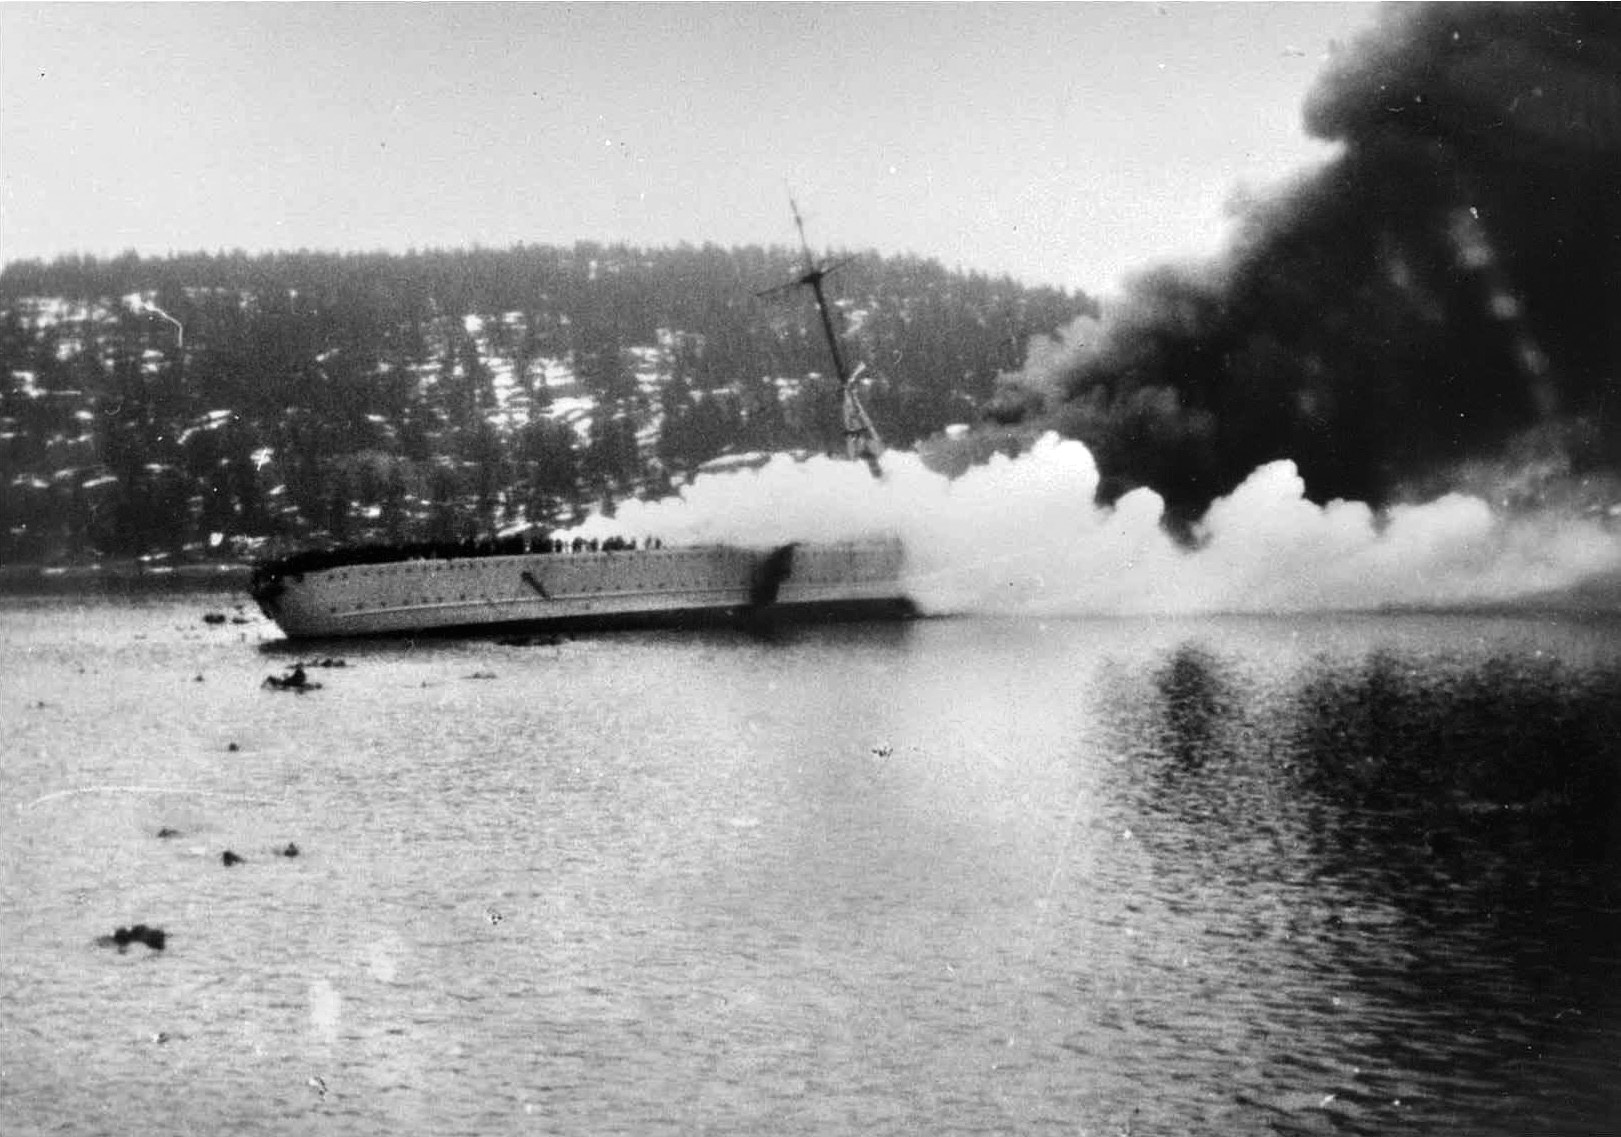 Blücher, hit repeatedly by large-caliber shells and torpedoes from Norwegian shore batteries, lists precipitously to port as smoke billows from its stricken superstructure. 